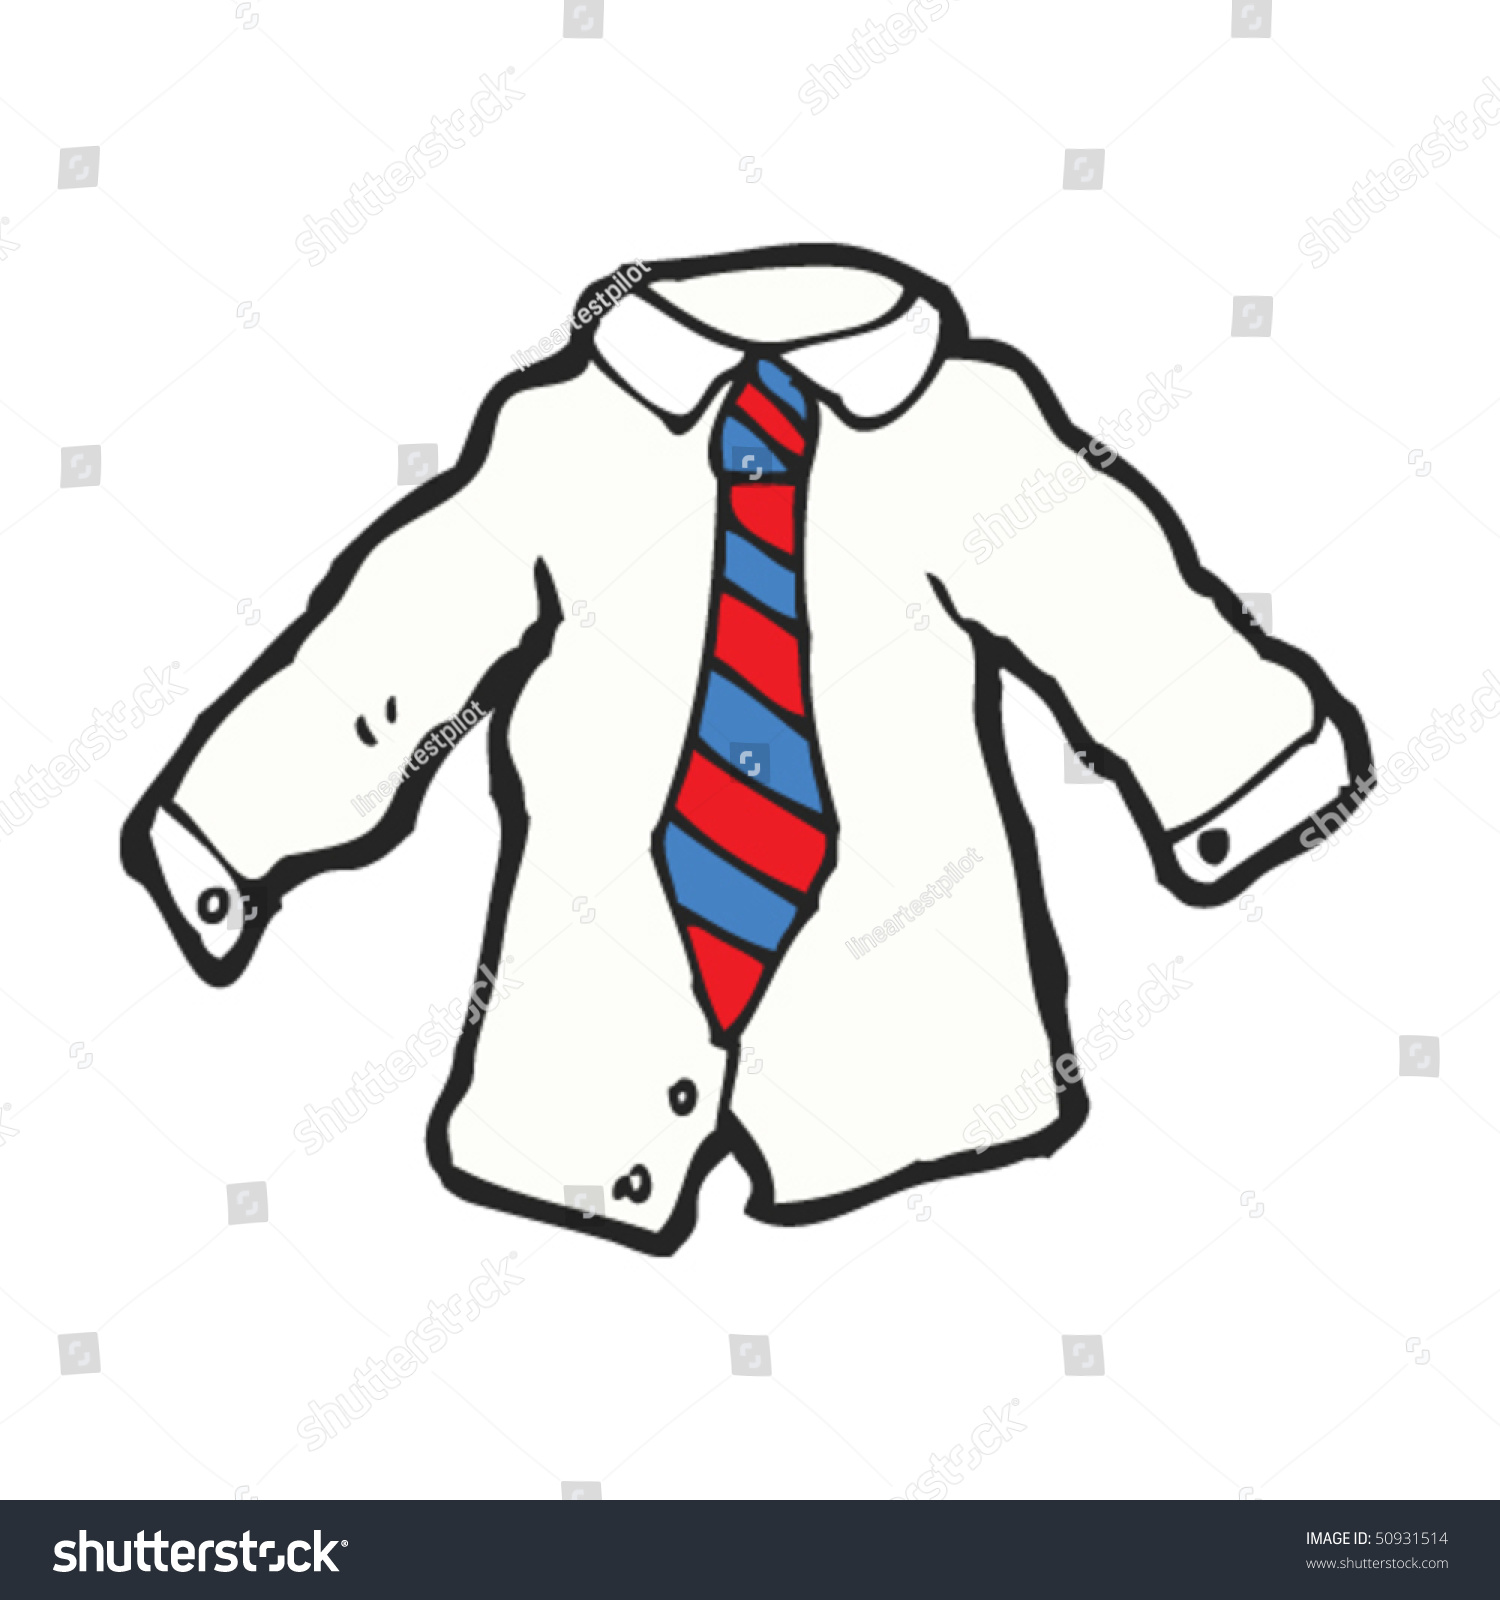 Quirky Drawing Of A Shirt And Tie Stock Vector Illustration 50931514 ...